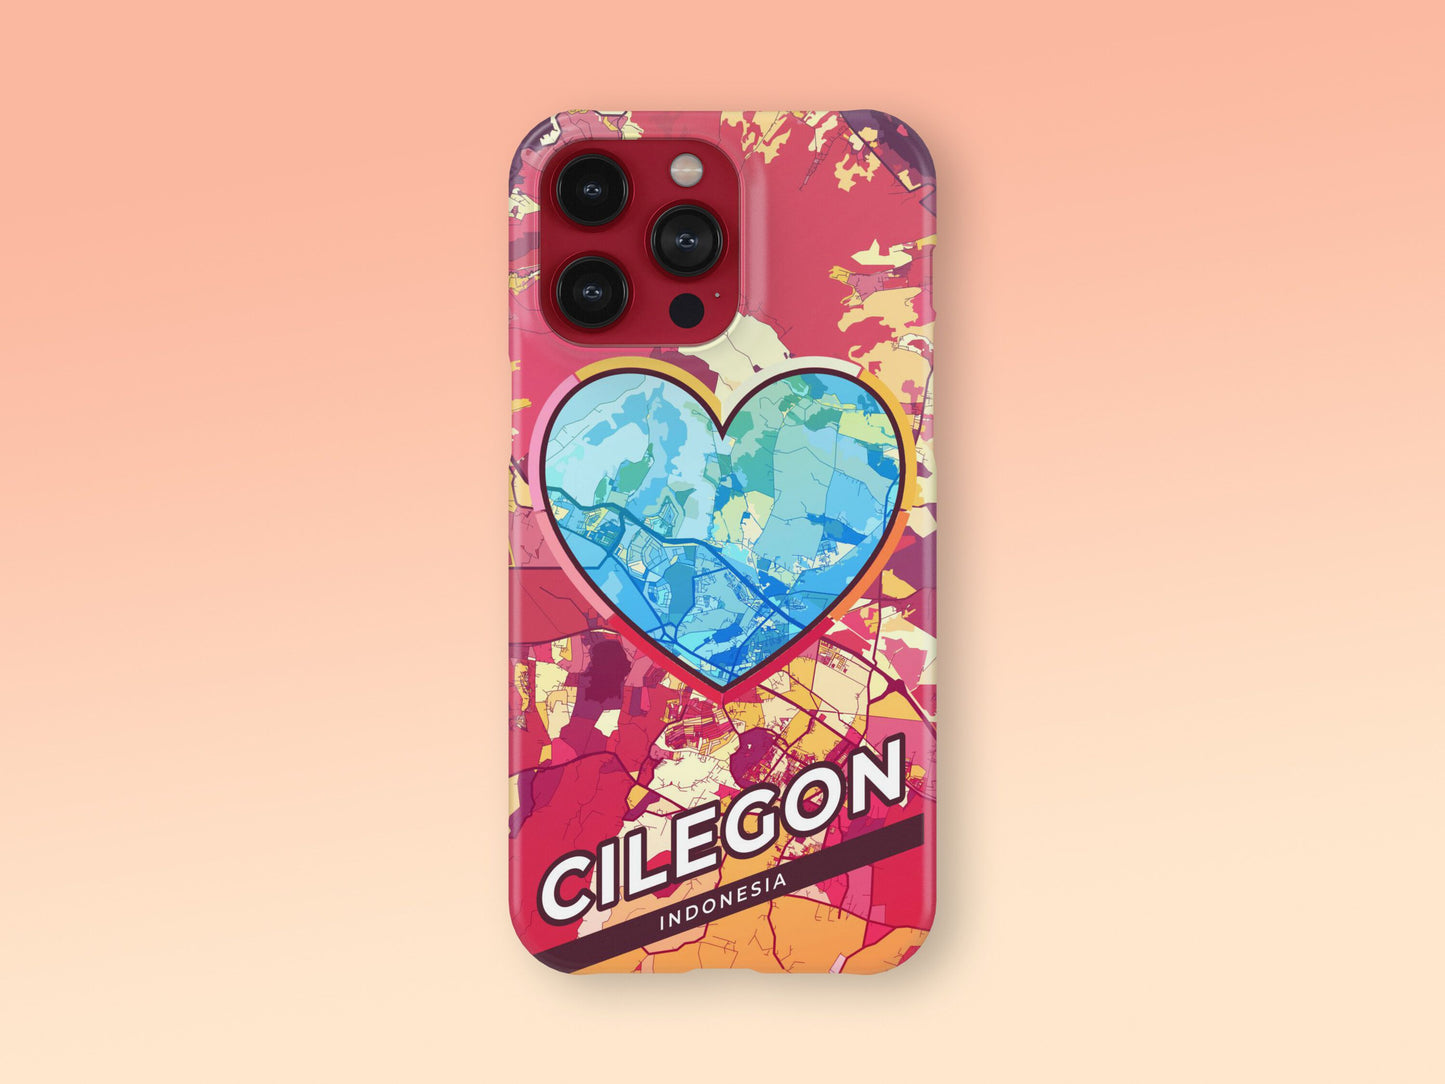 Cilegon Indonesia slim phone case with colorful icon. Birthday, wedding or housewarming gift. Couple match cases. 2